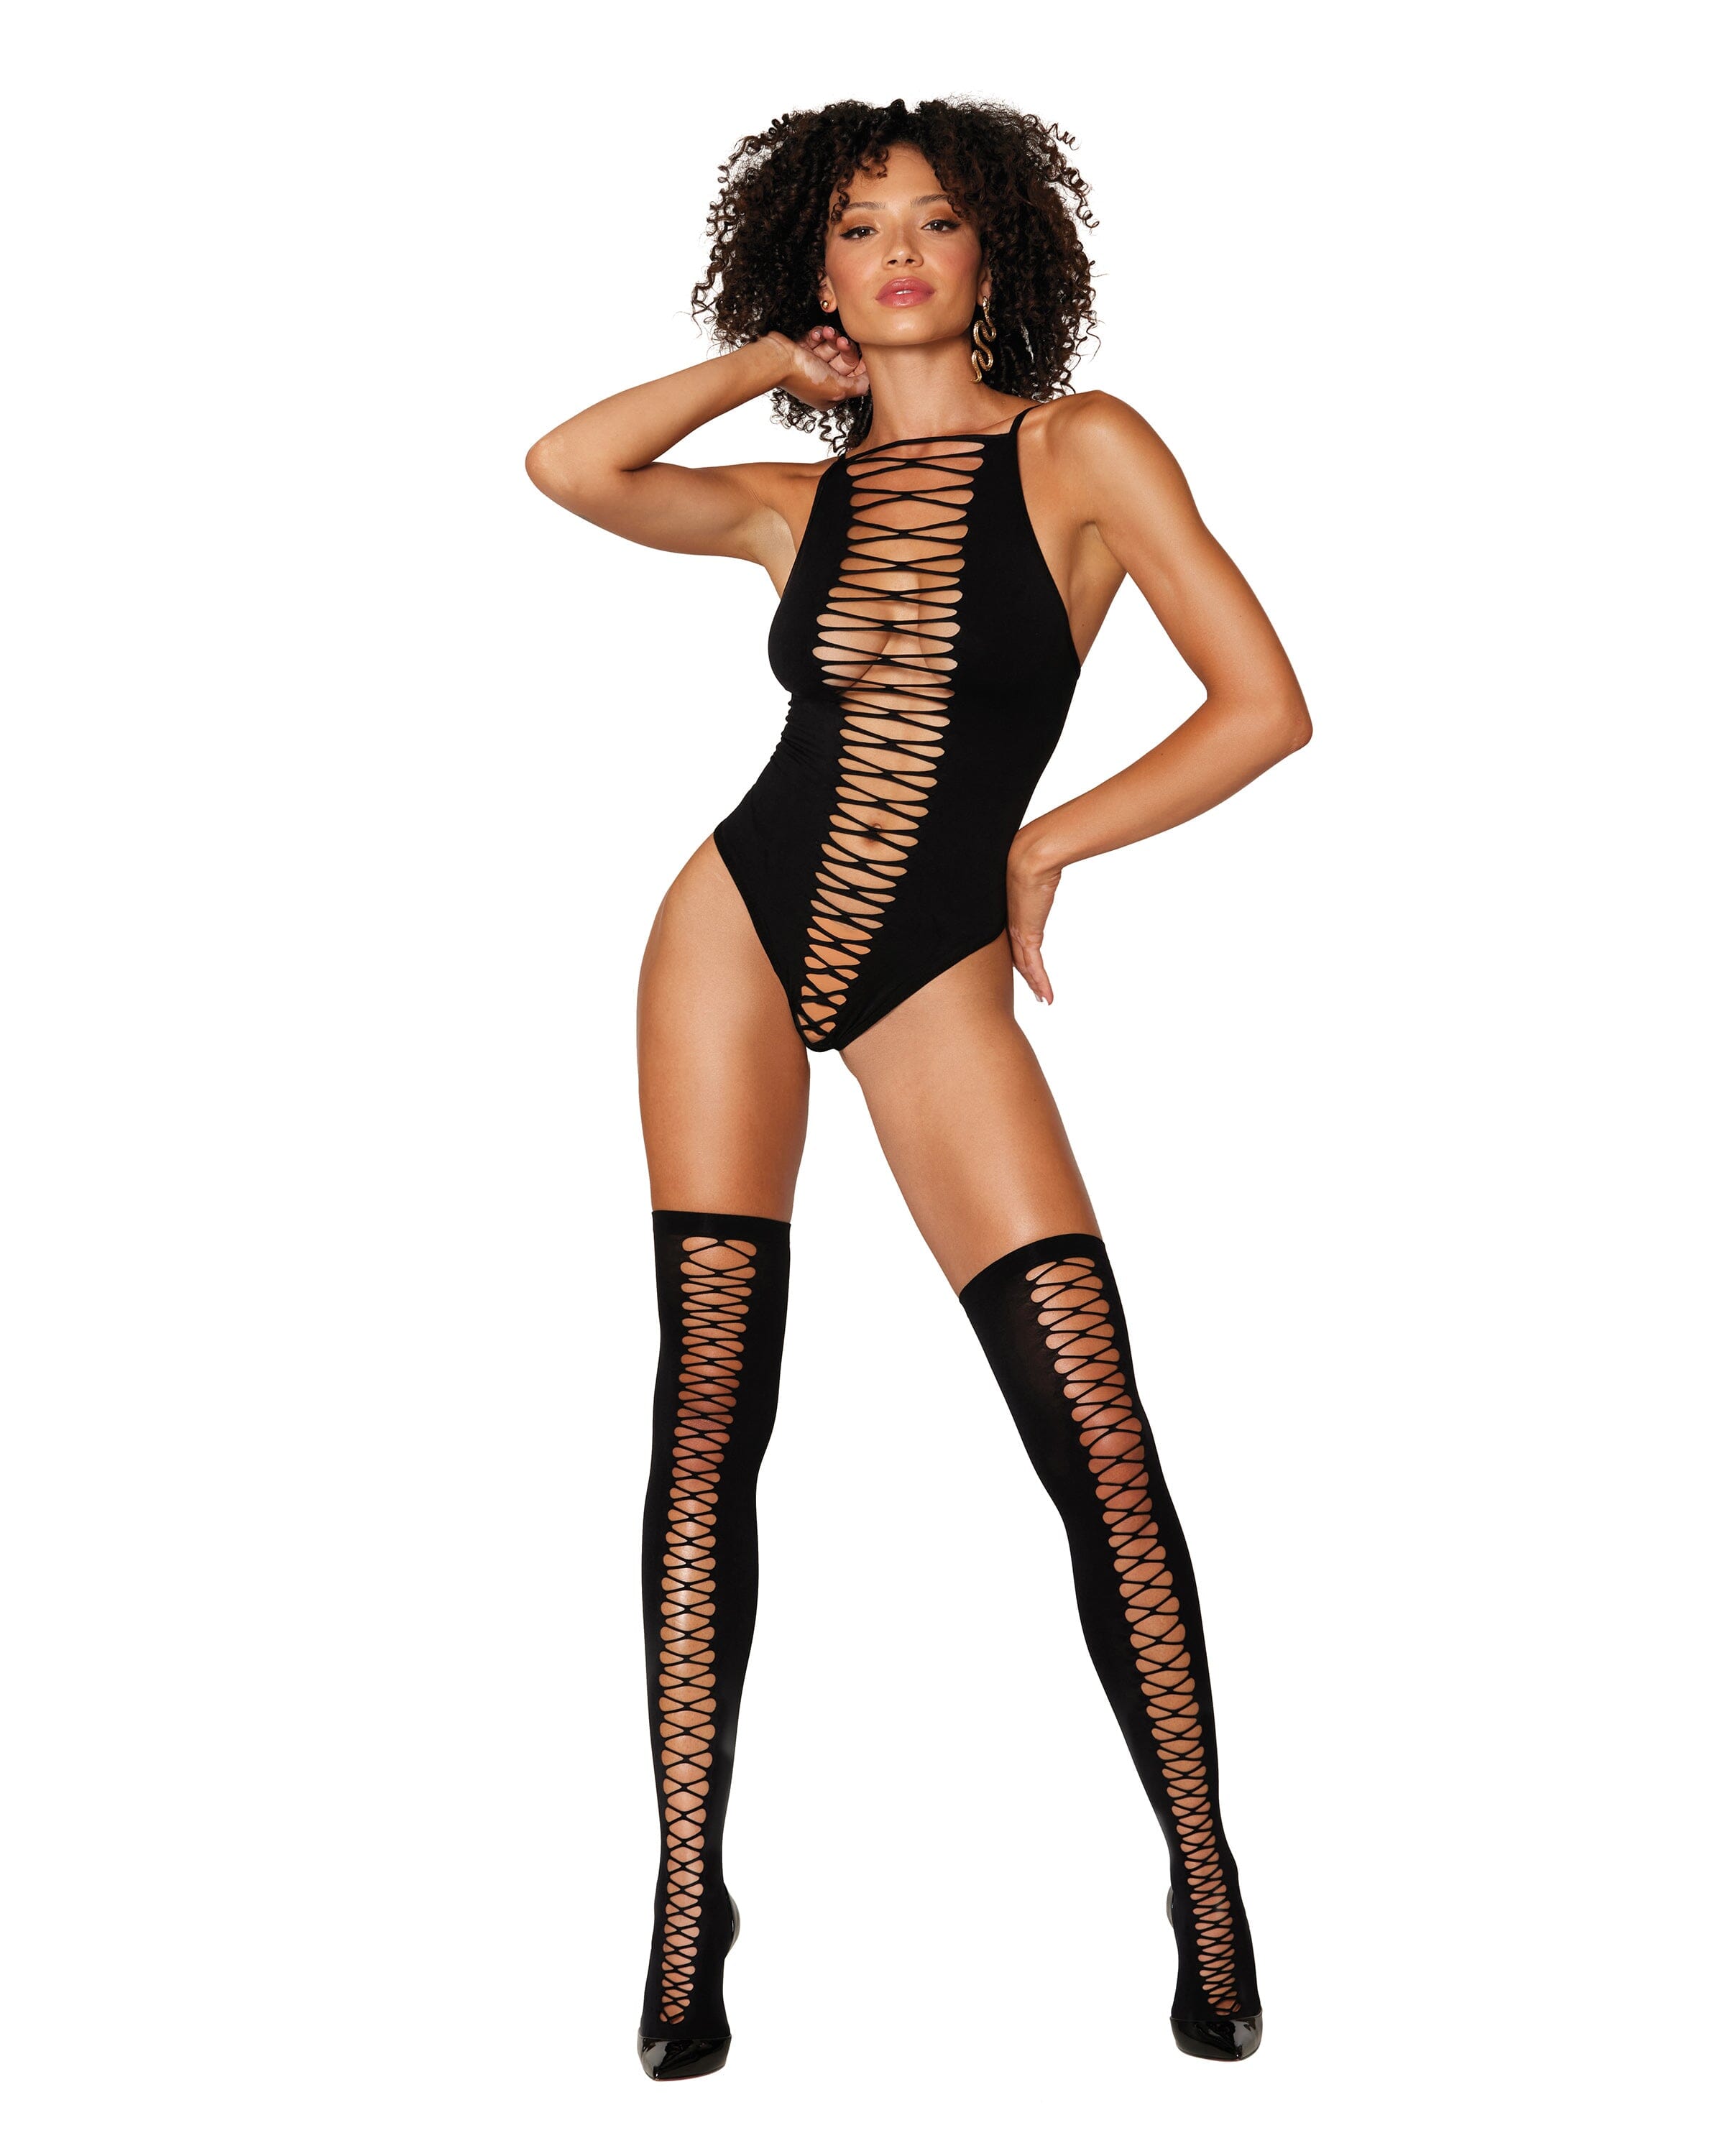 Dreamgirl womens Open Crotch Bodystocking Lingerie, Black, One Size US